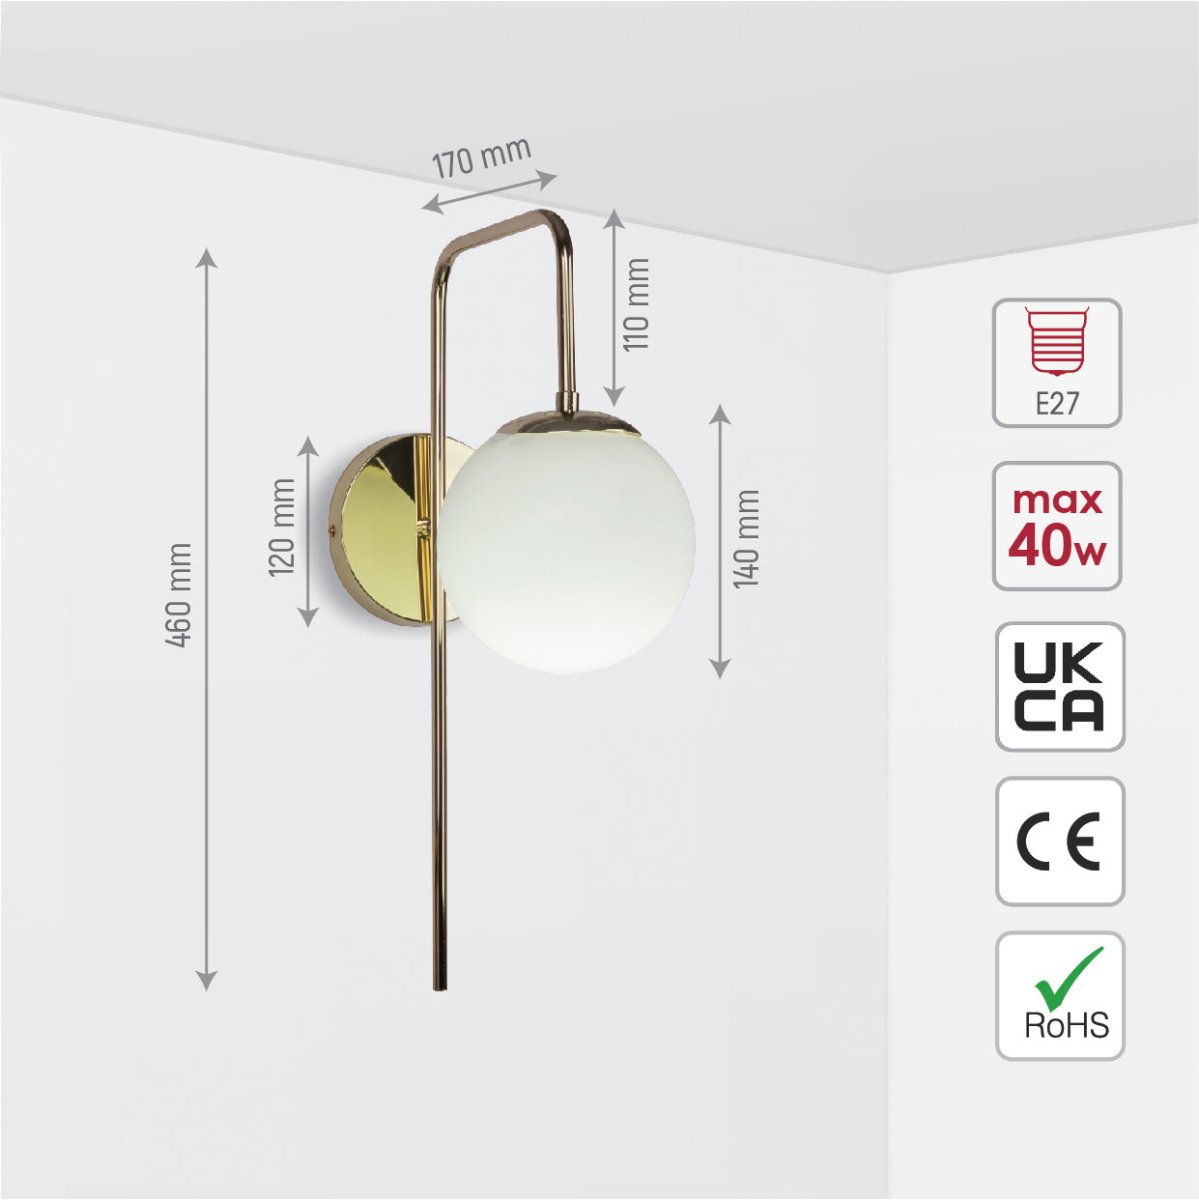 Size and specs of Opal Globe Glass Bronze Cane Metal Downward Wall Light with E27 Fitting | TEKLED 151-19524